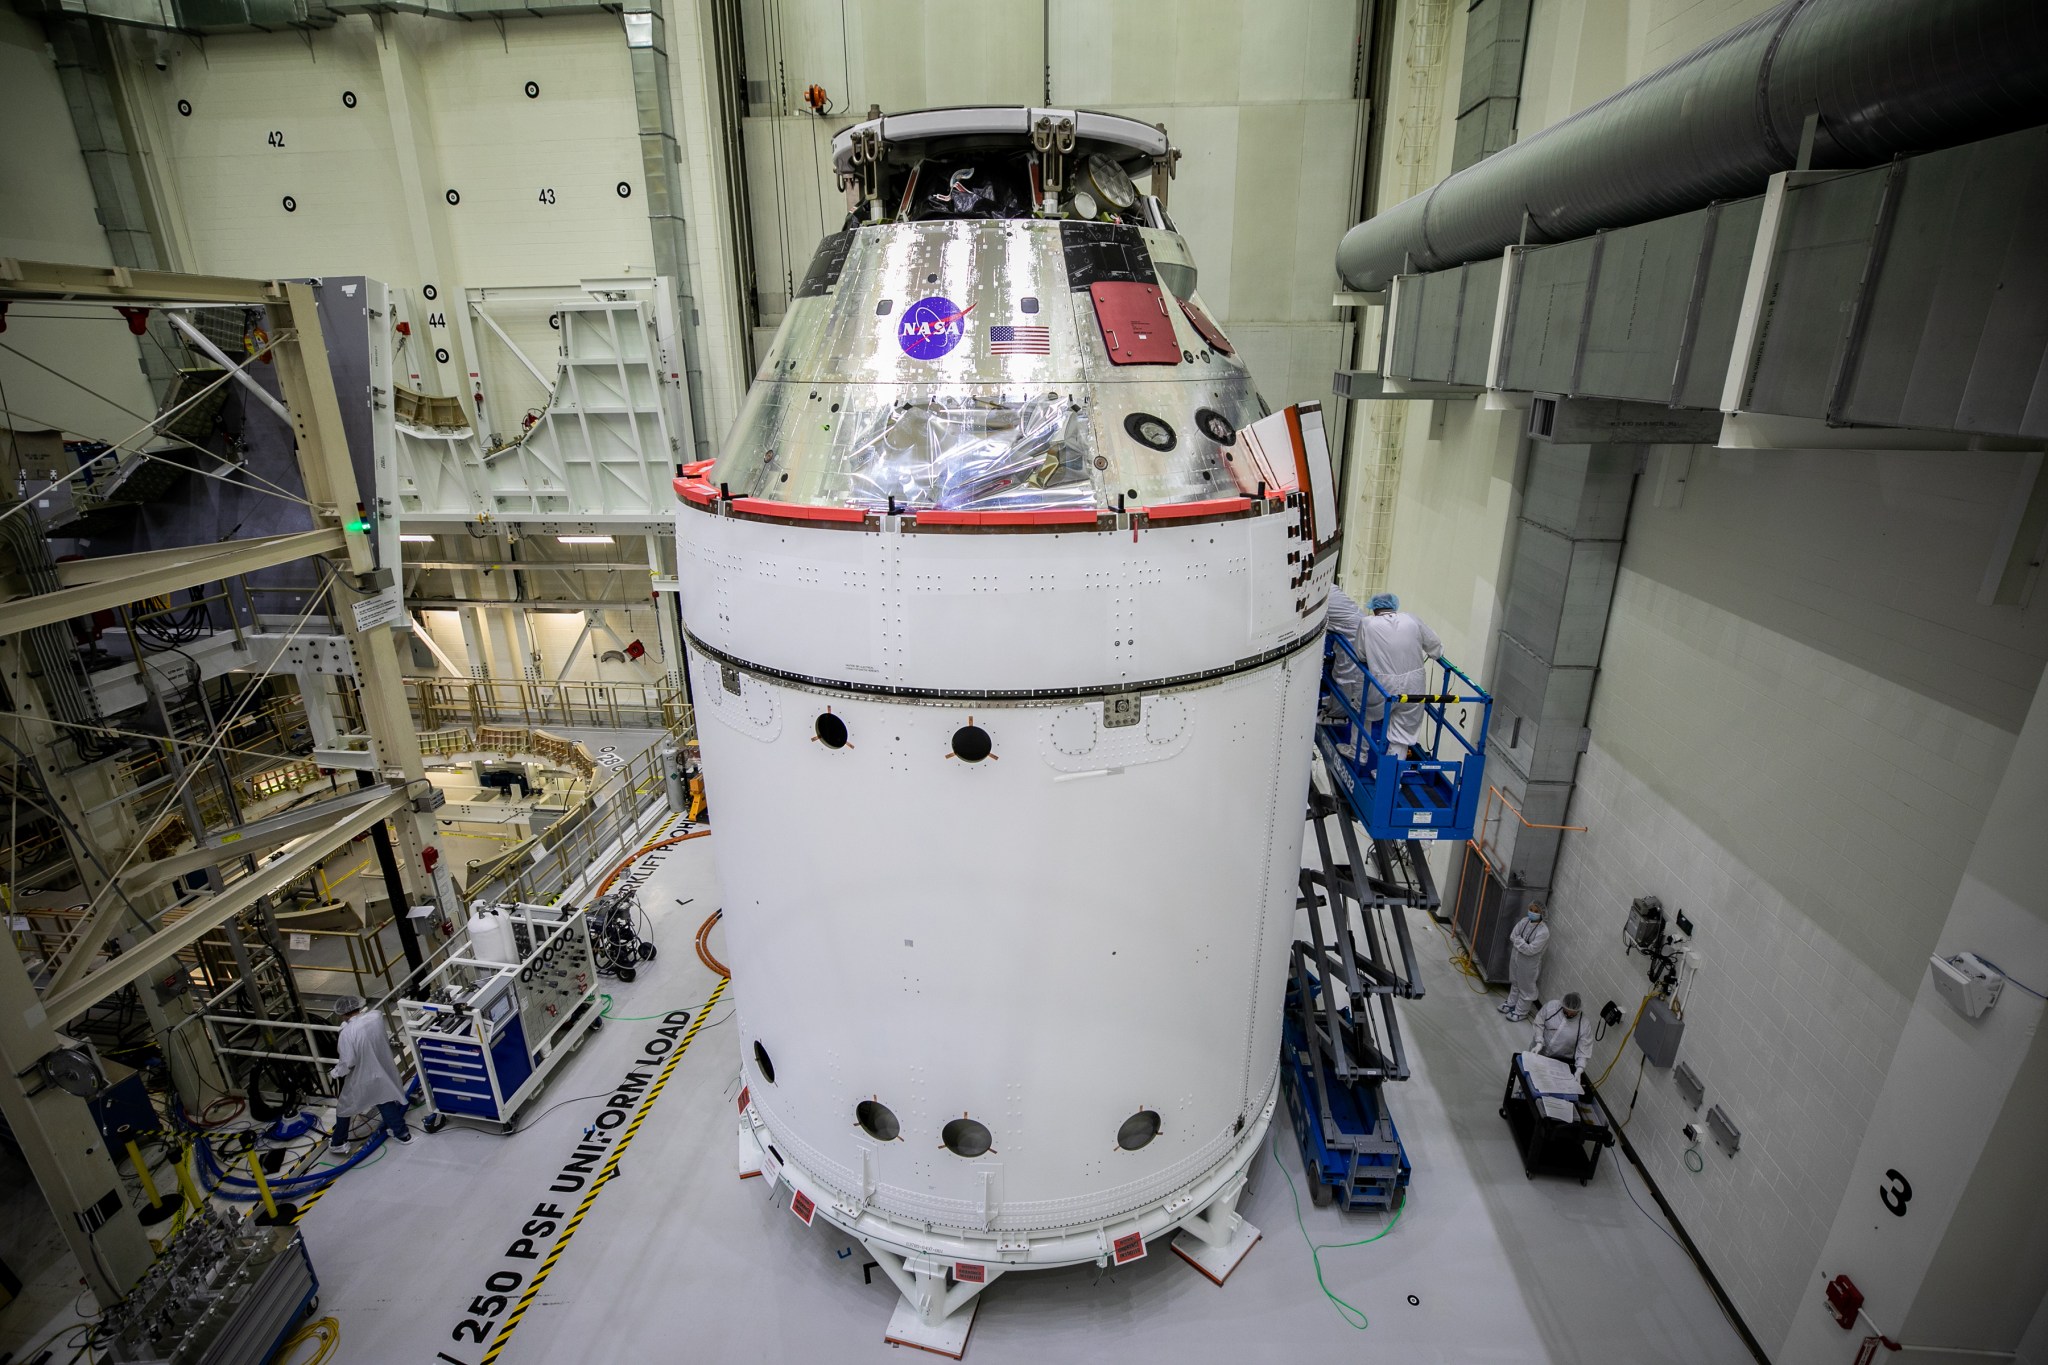 The Orion spacecraft for NASA’s Artemis I mission is in view inside the Neil Armstrong Operations and Checkout Building